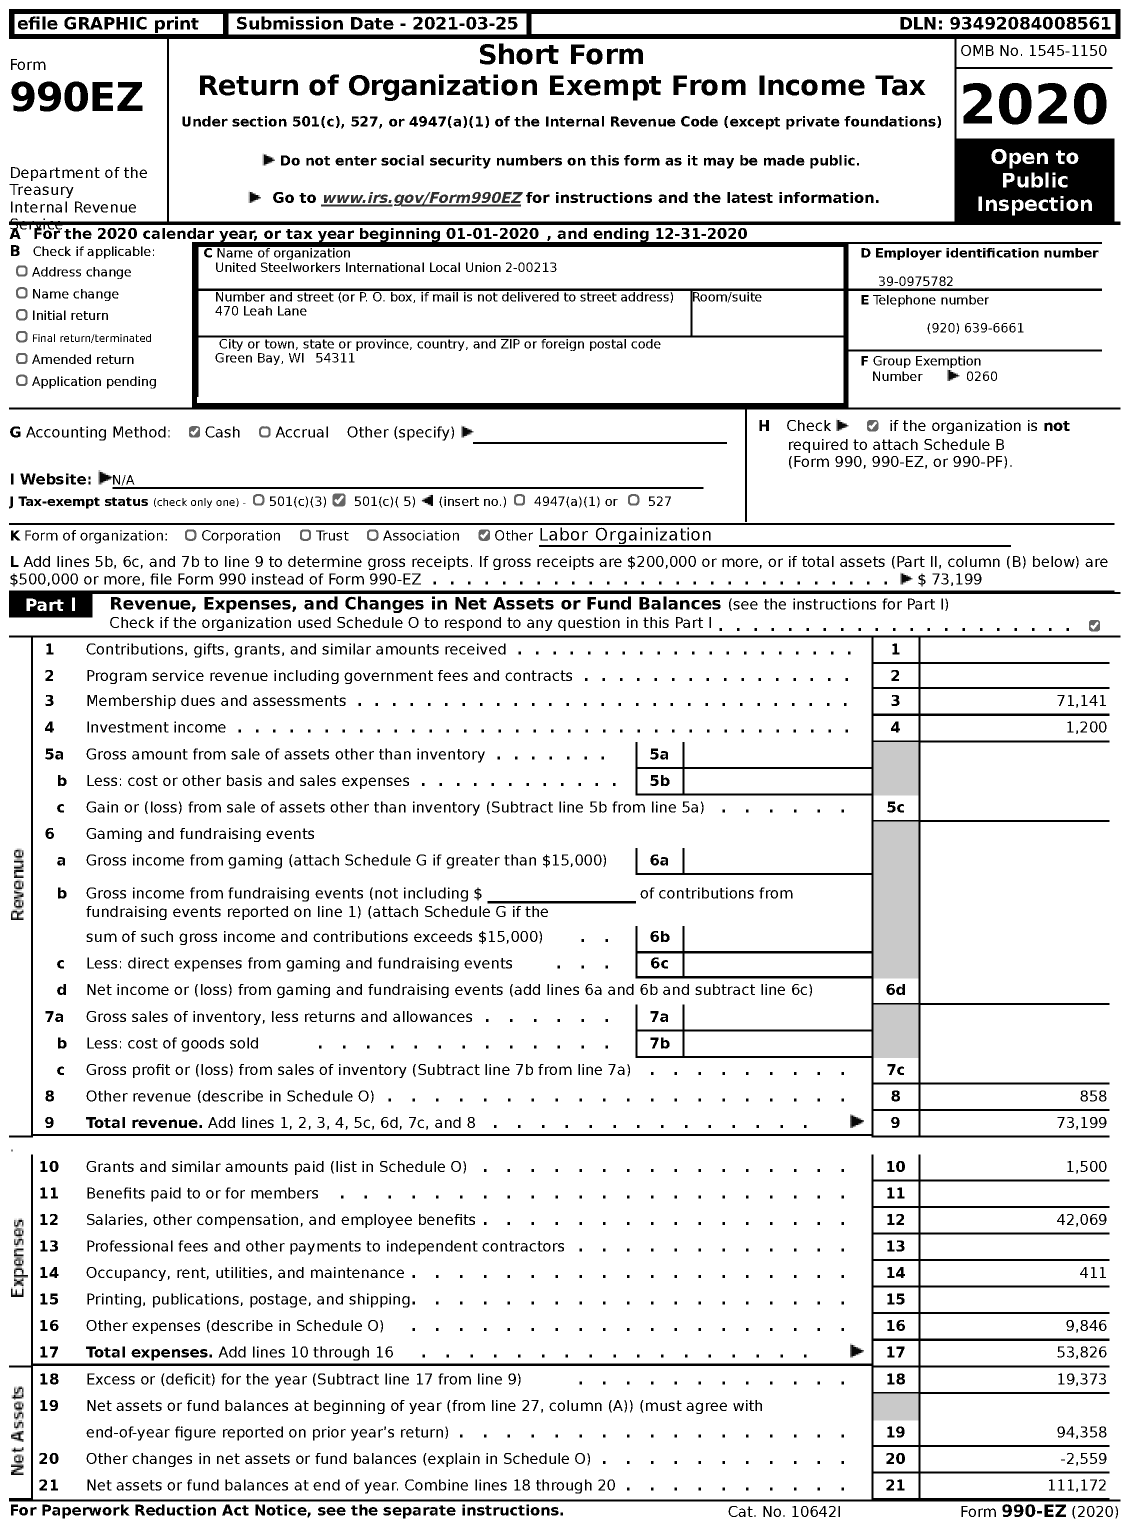 Image of first page of 2020 Form 990EZ for United Steelworkers - 2-00213 Local